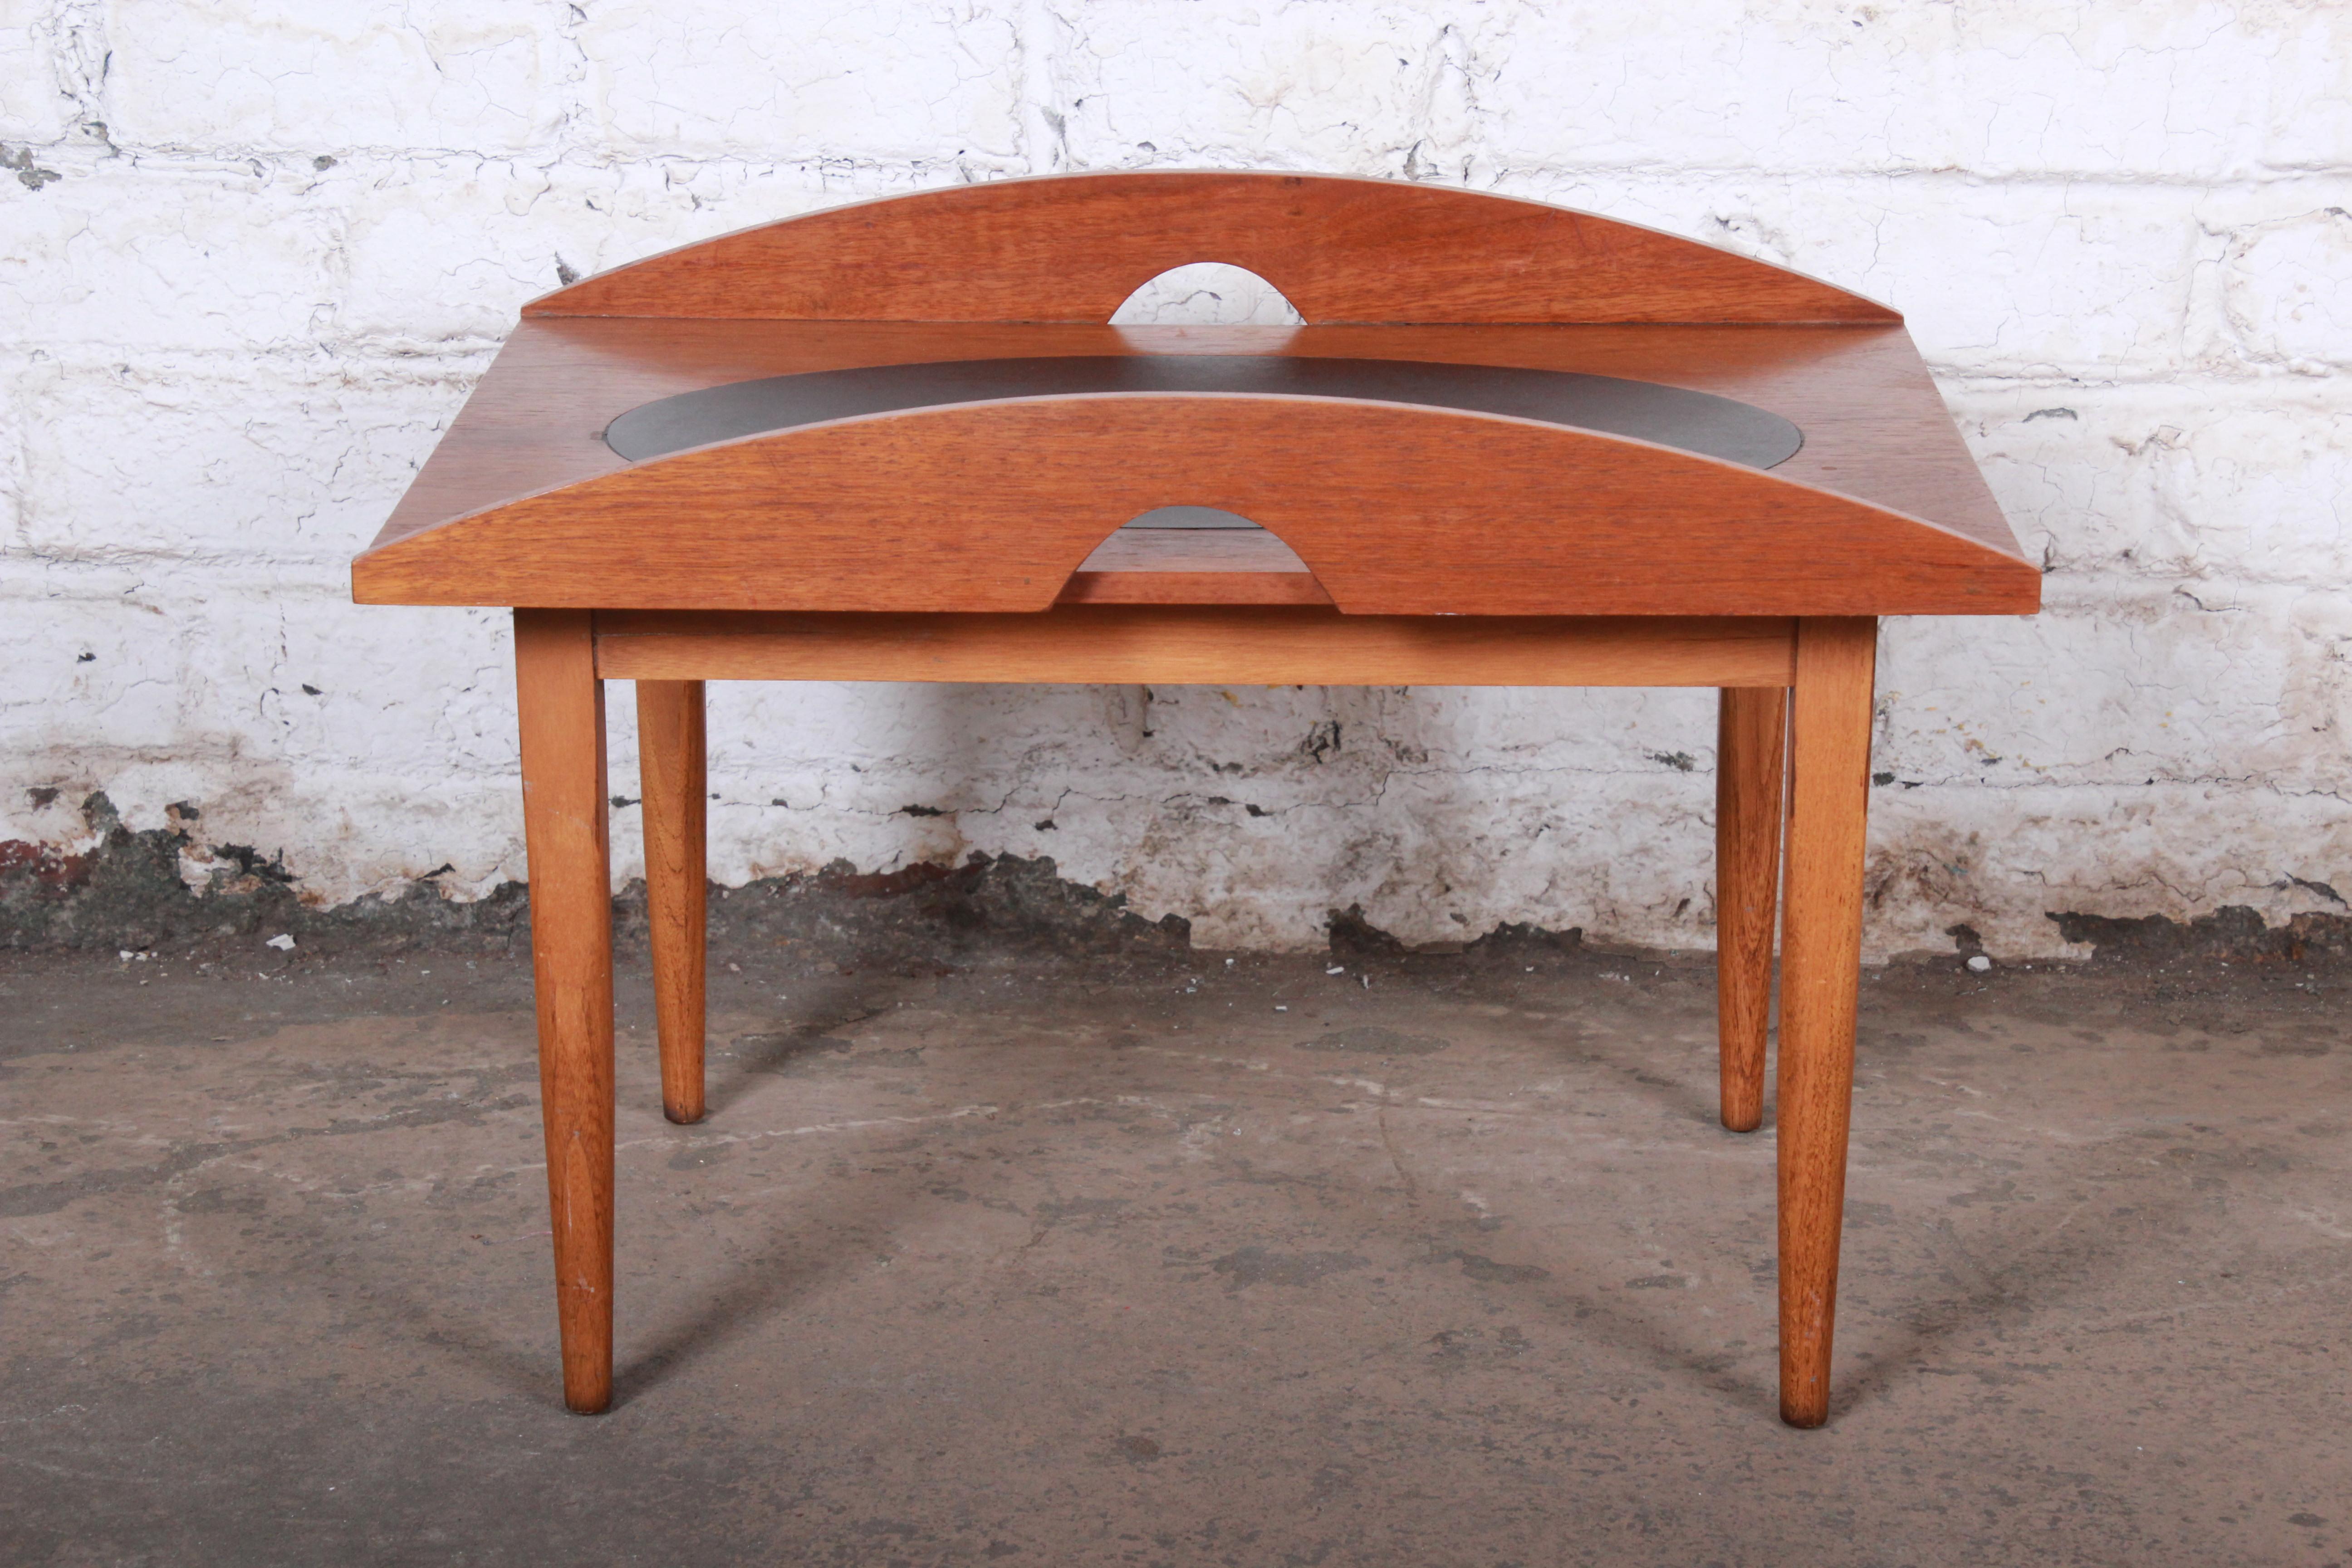 Mid-Century Modern walnut and inlaid leather occasional side table

Designed by Paul McCobb for Lane Furniture 